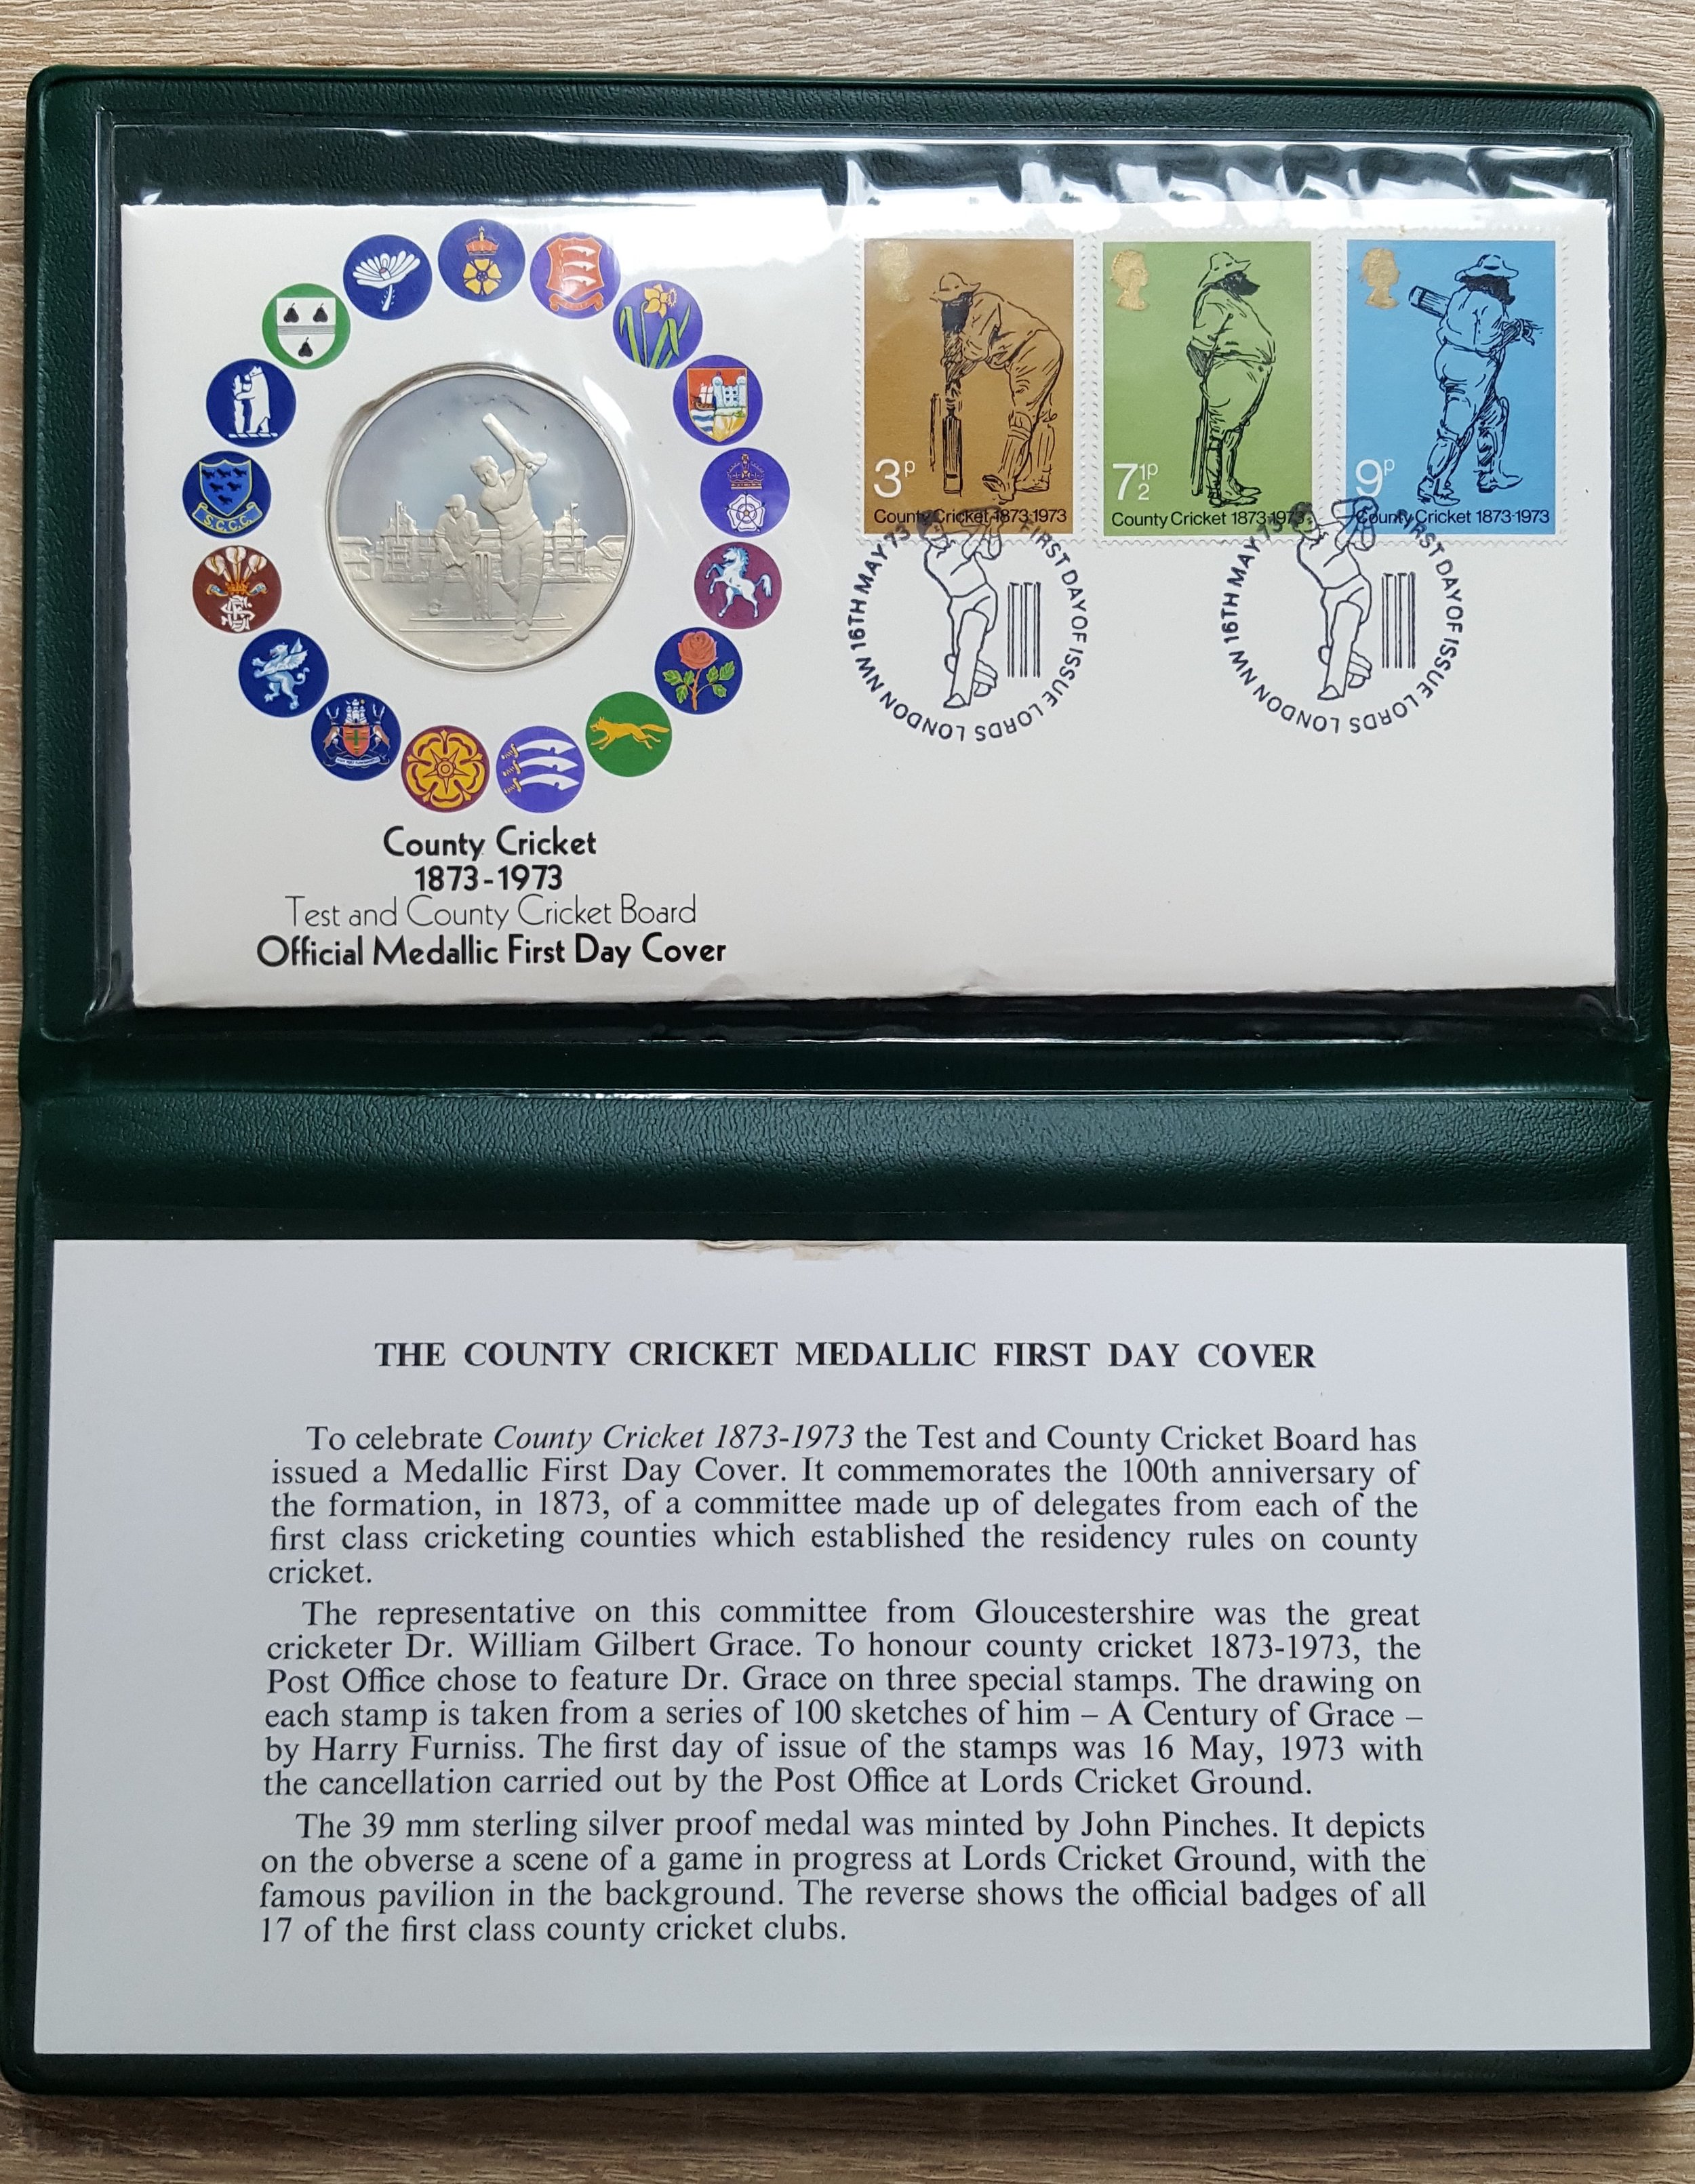 Cricket Board 1873 - 1973 Medallic (Sterling Silver Proof) First Day Cover.  